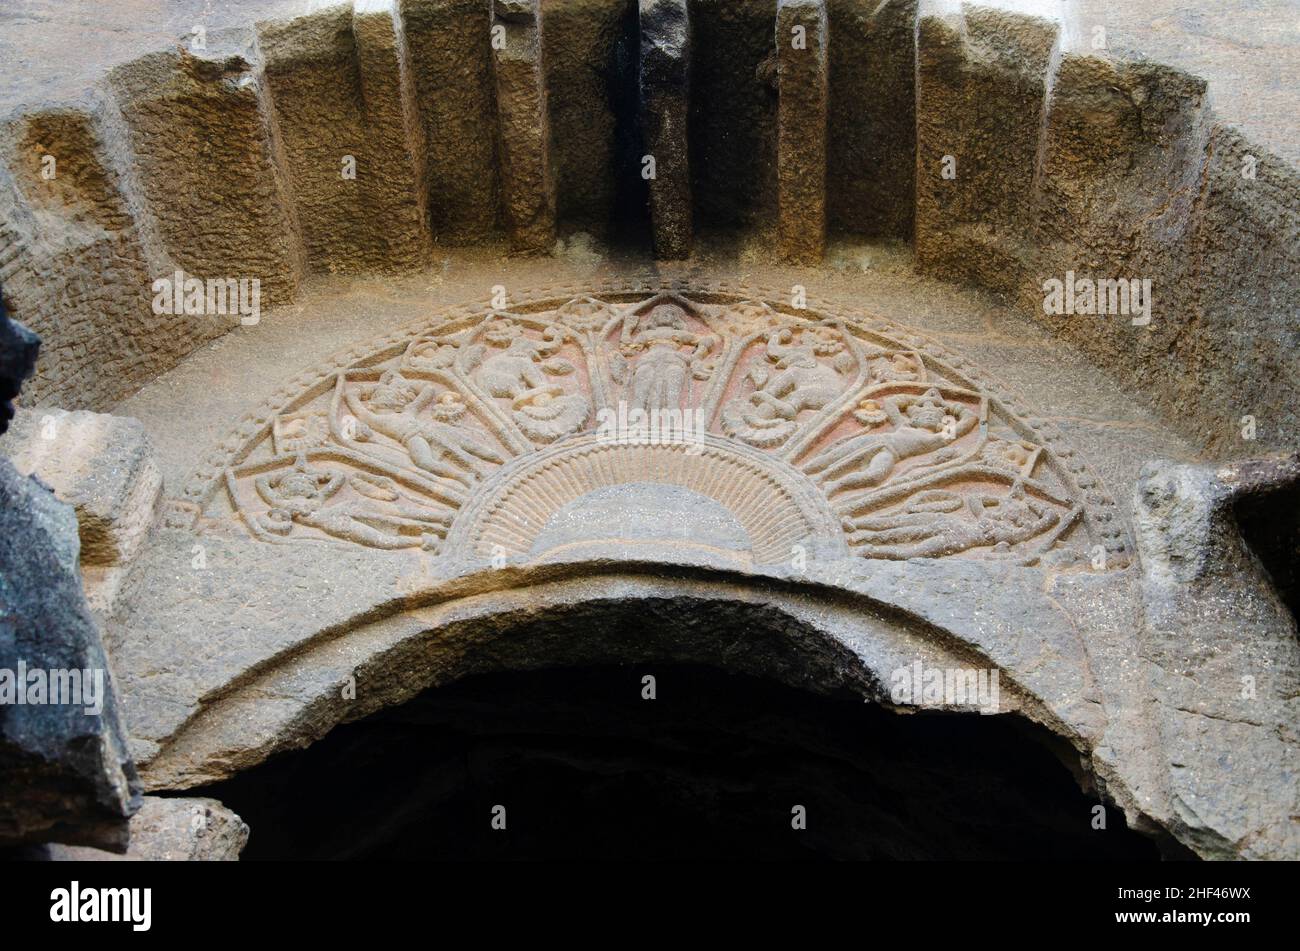 Bhutalinga cave with a horseshoe arch over the entrance containing petal-shaped compartments filled with reliefs of Lakshmi, elephants and devotees Stock Photo